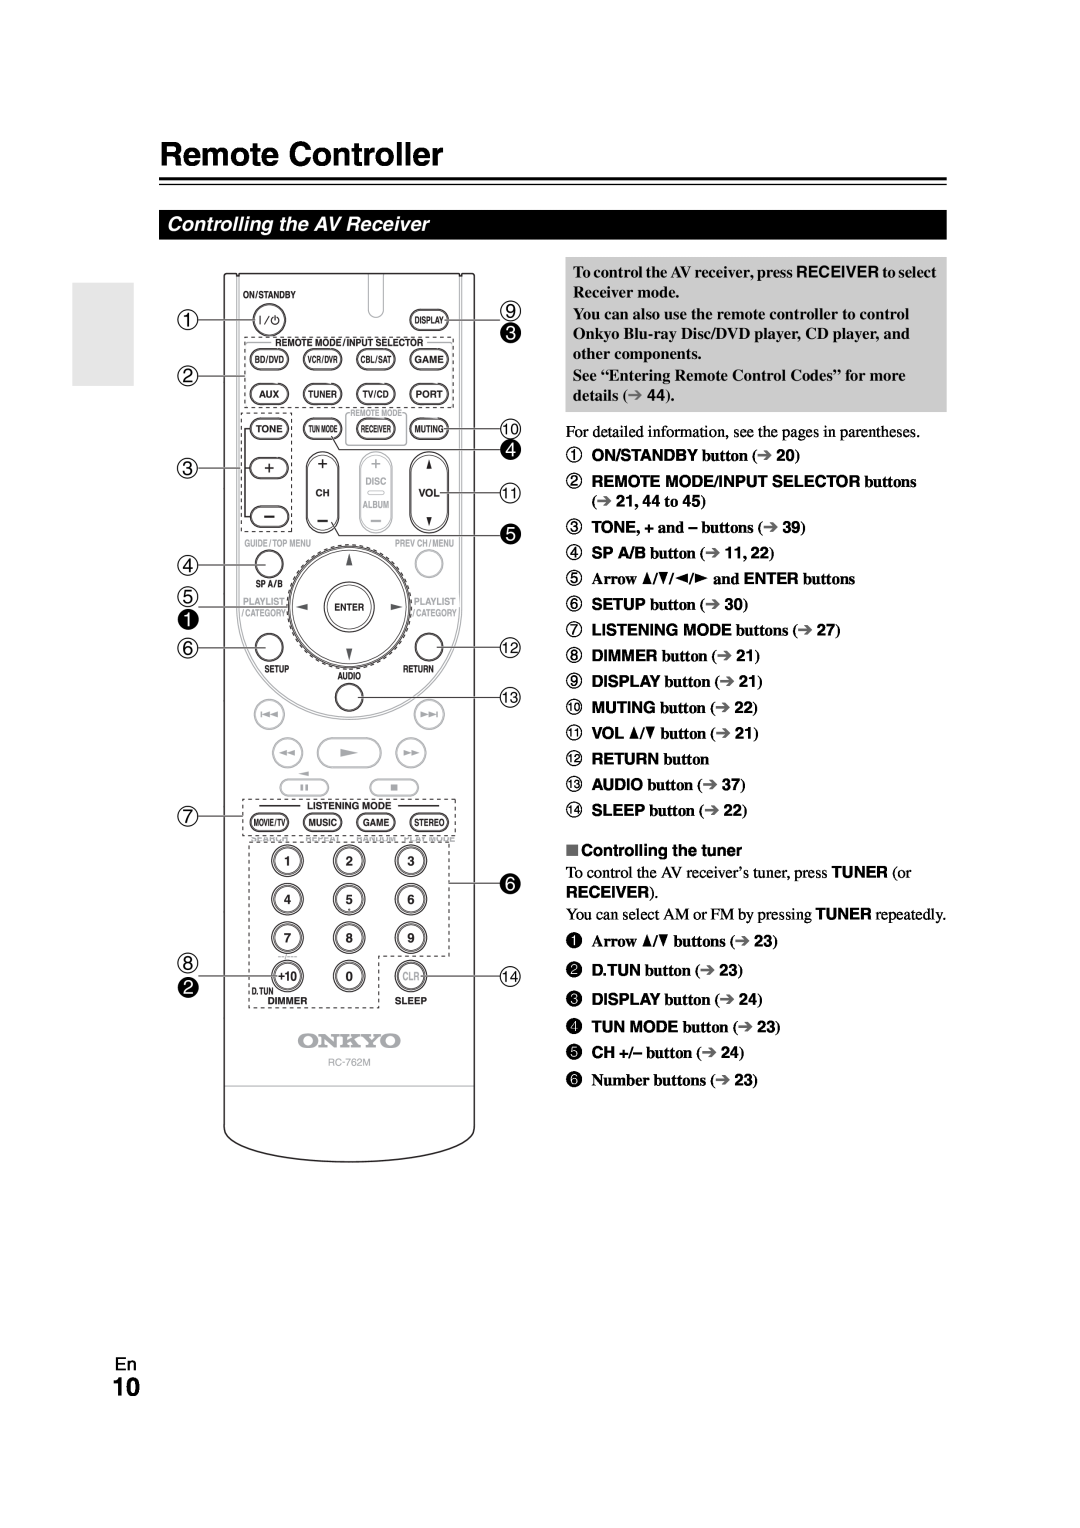 Onkyo HT-S3300 instruction manual Remote Controller 